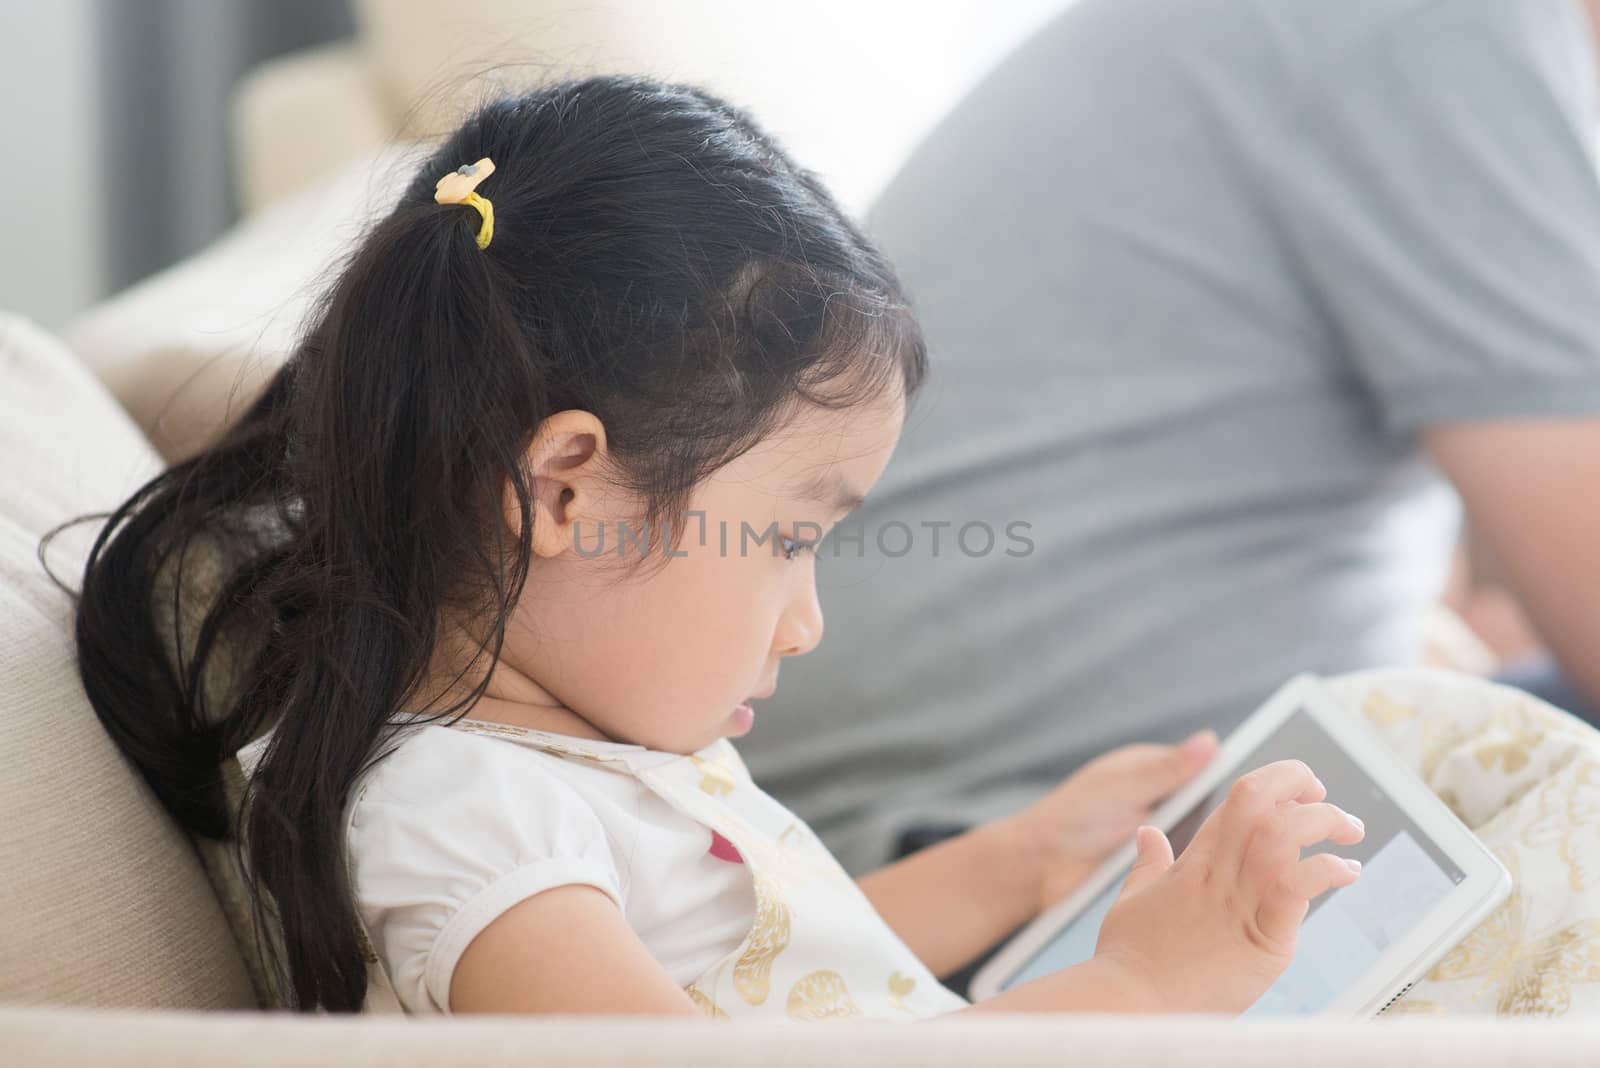 Little girl using digital tablet on sofa. Asian family at home, living lifestyle indoors.